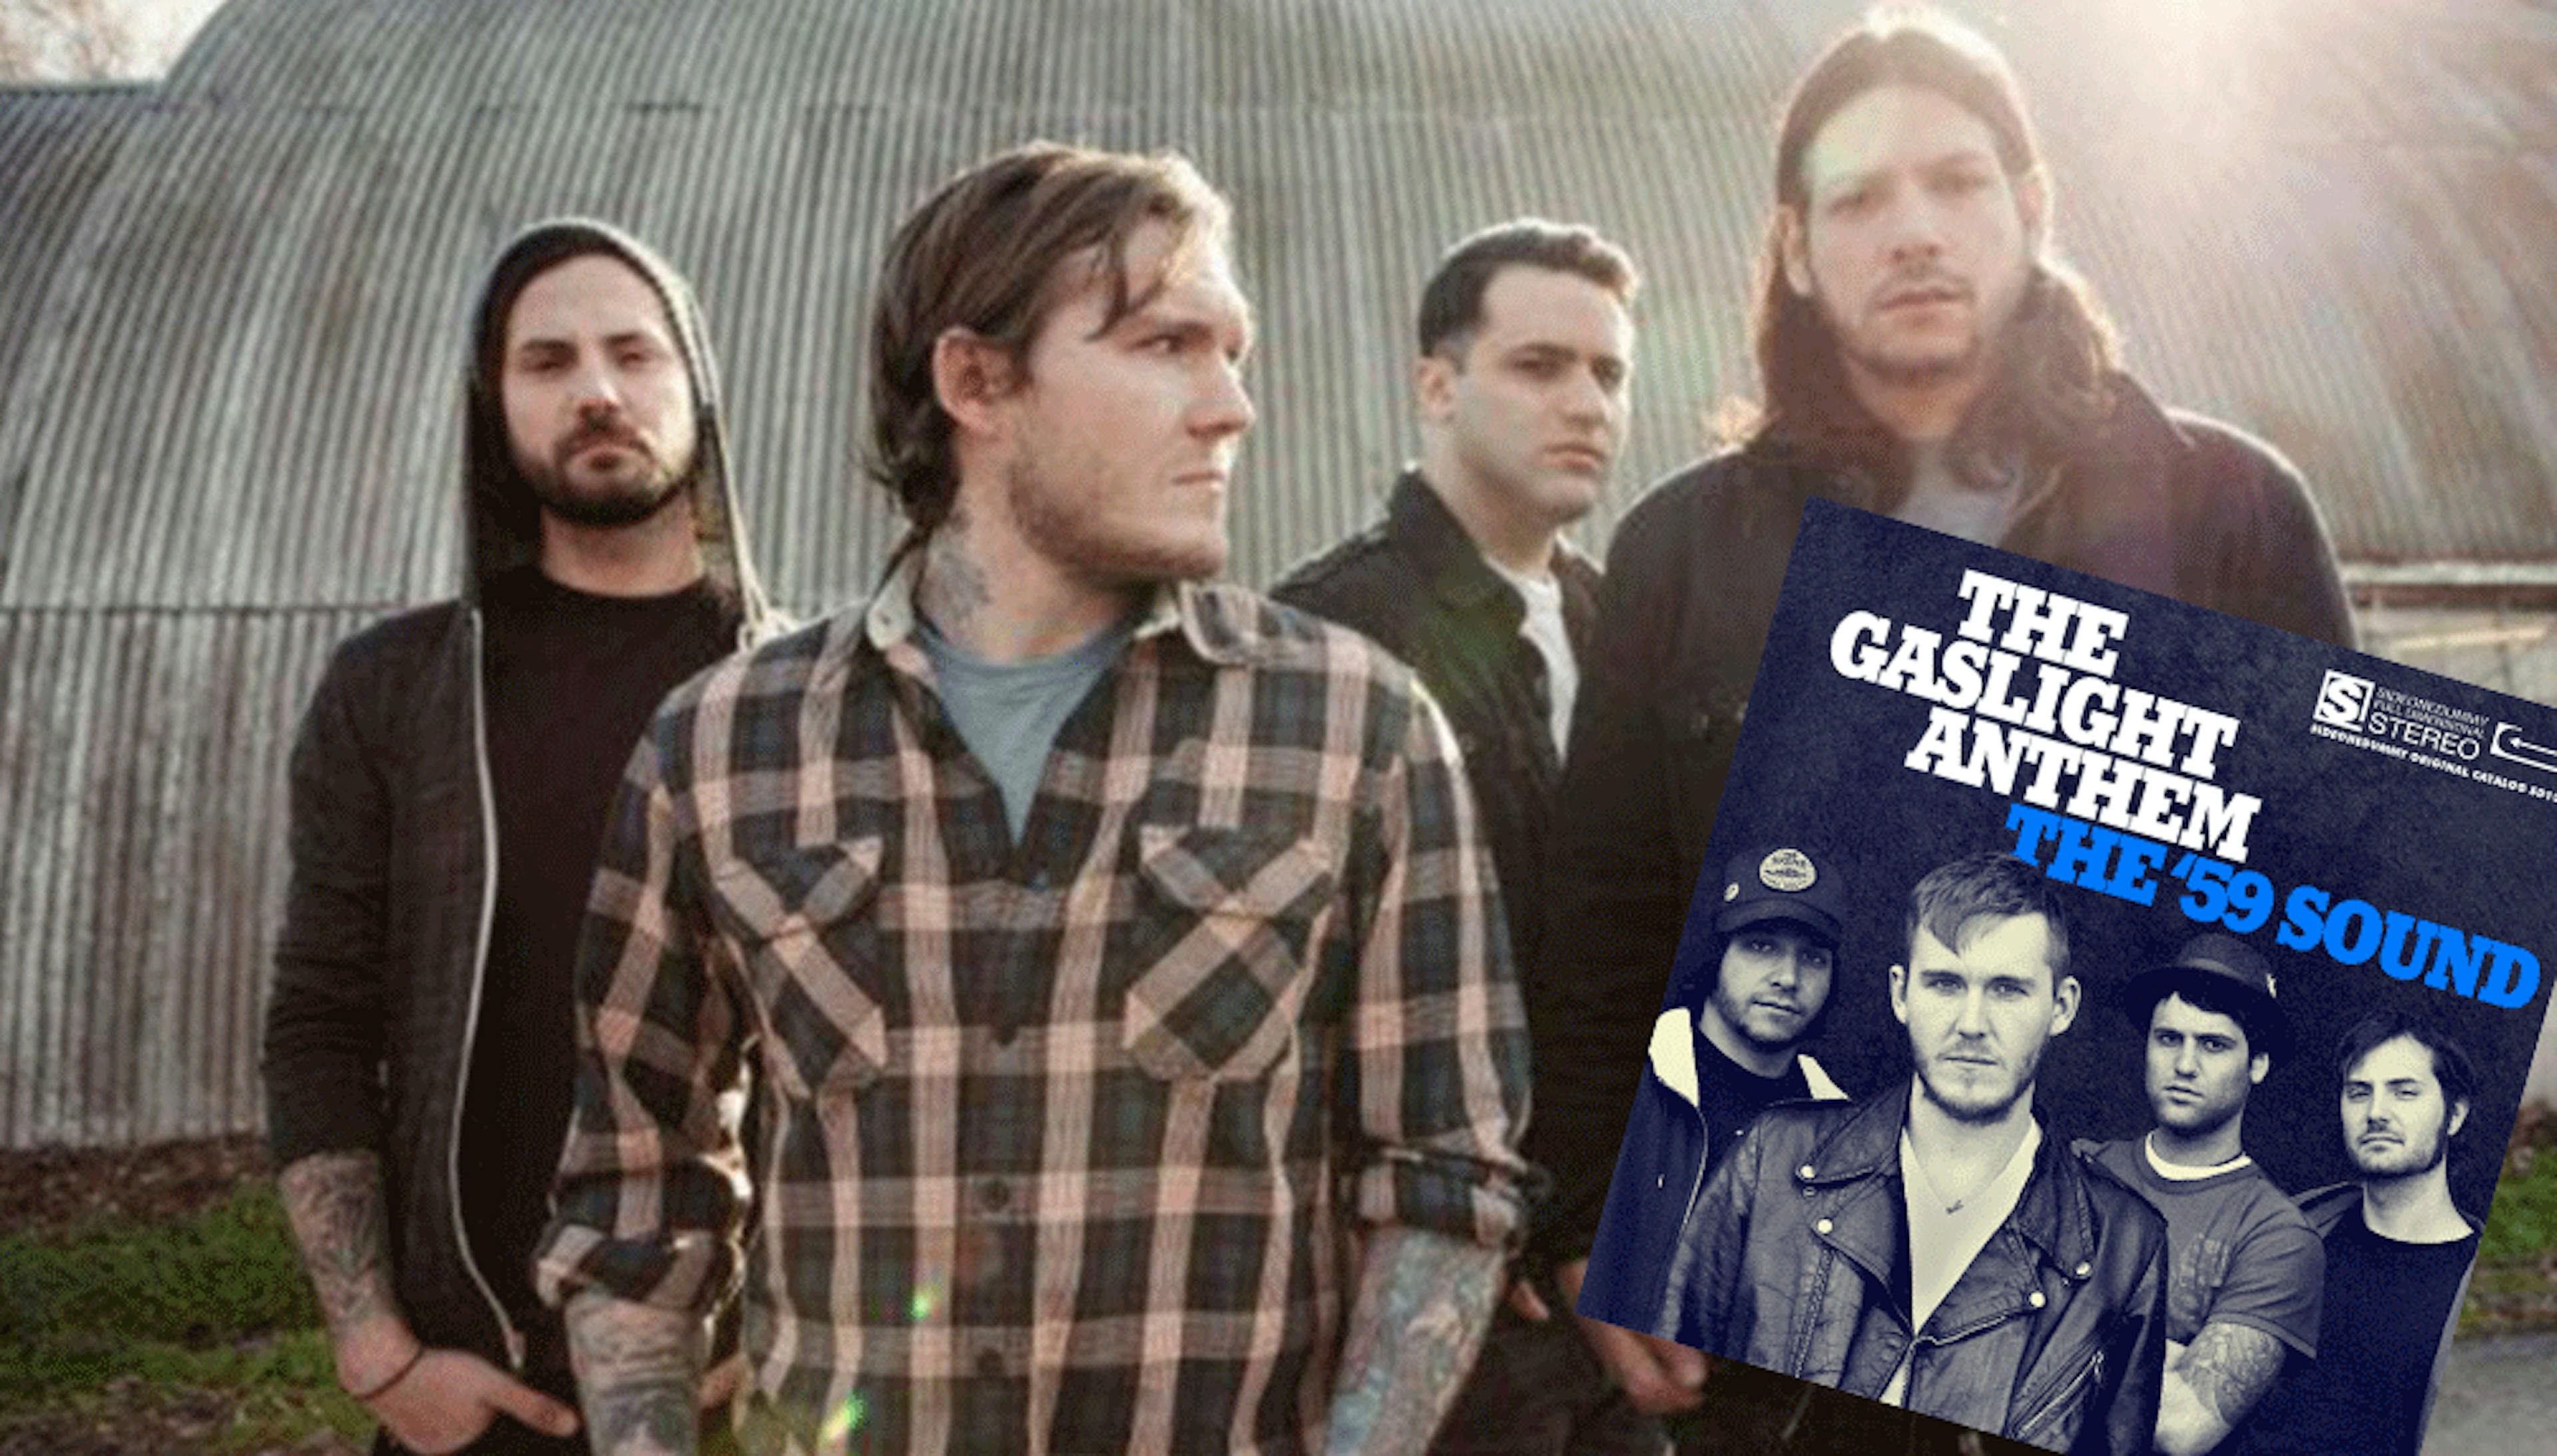 The Gaslight Anthem Announce The '59 Sound Anniversary UK Shows